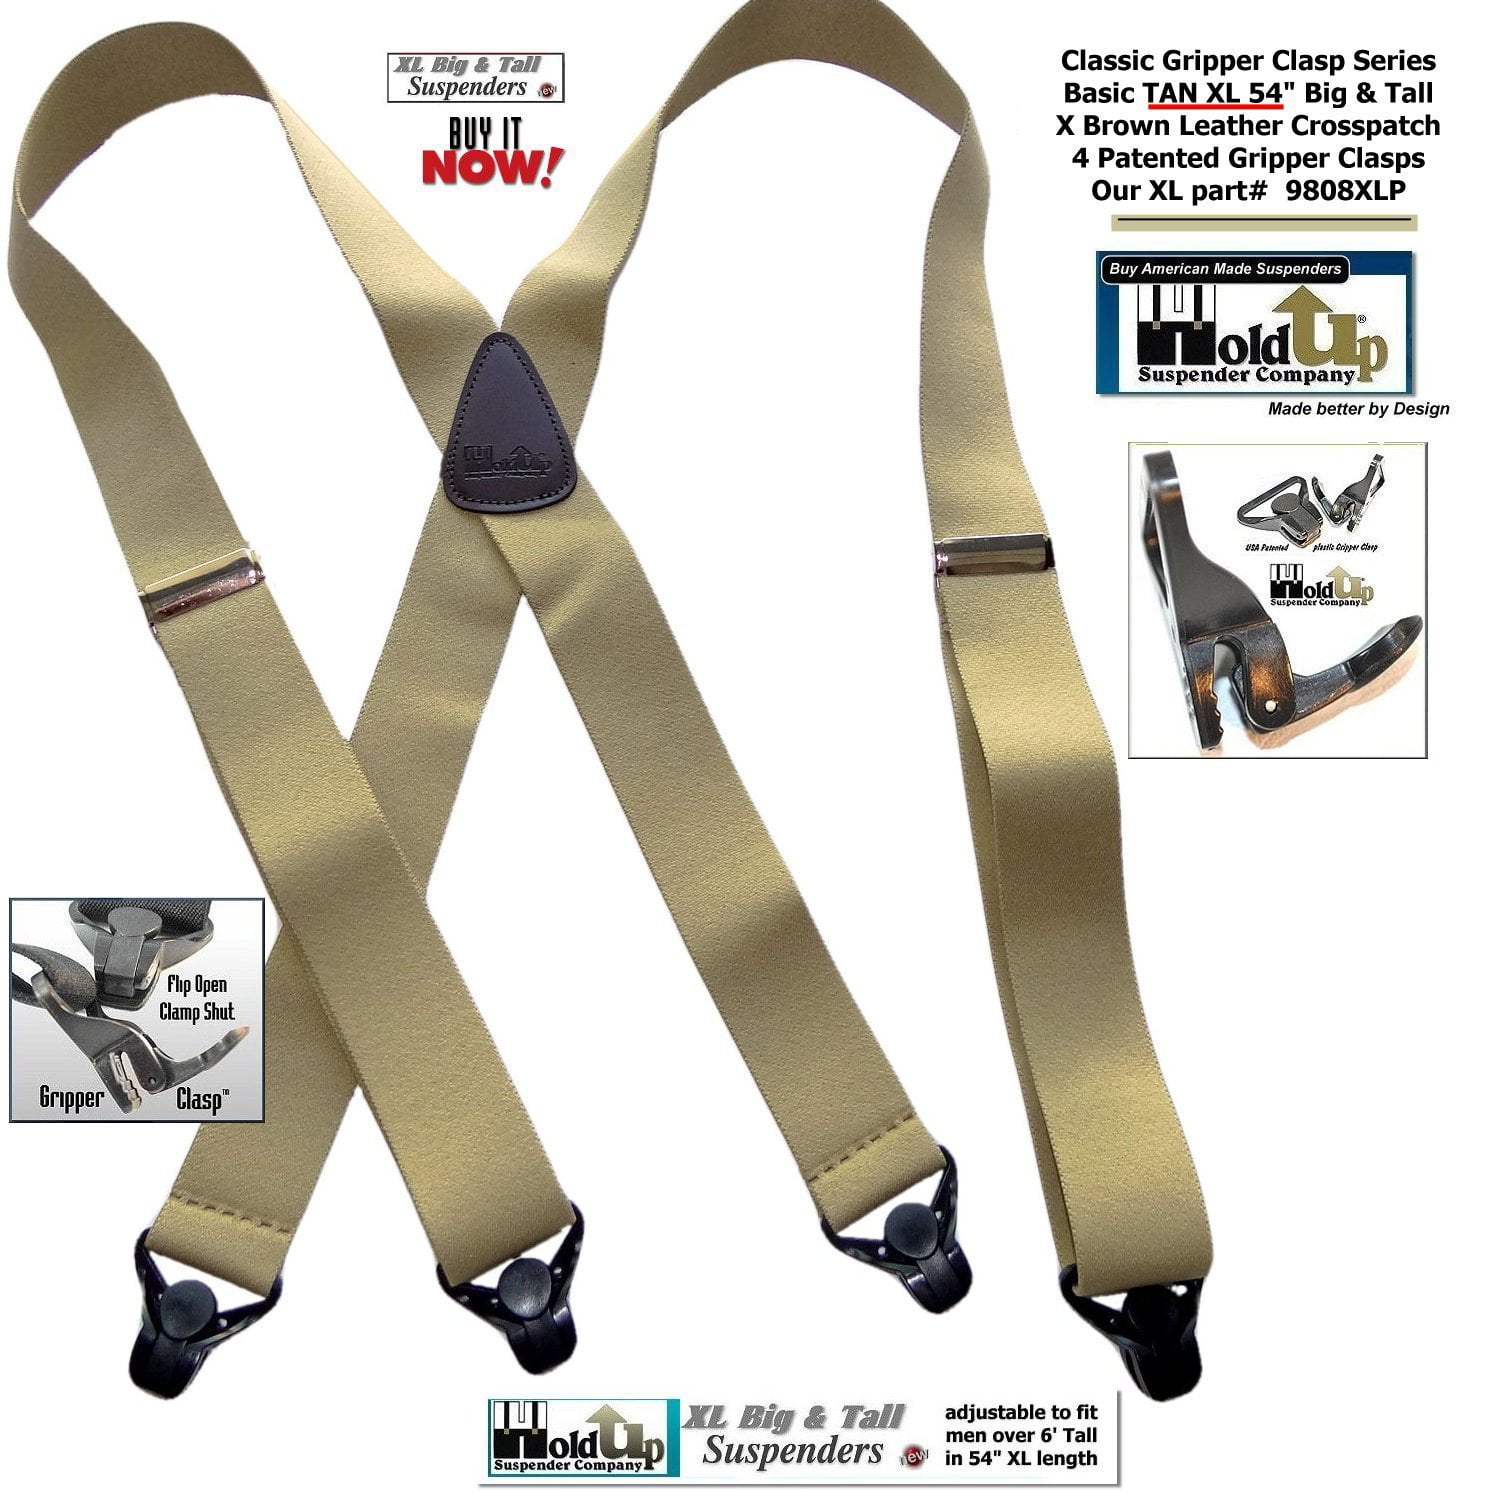 Holdup USA Made Classic tan XL suspender 1 1/2 wide 54 long with patented silver clips 9908XLS